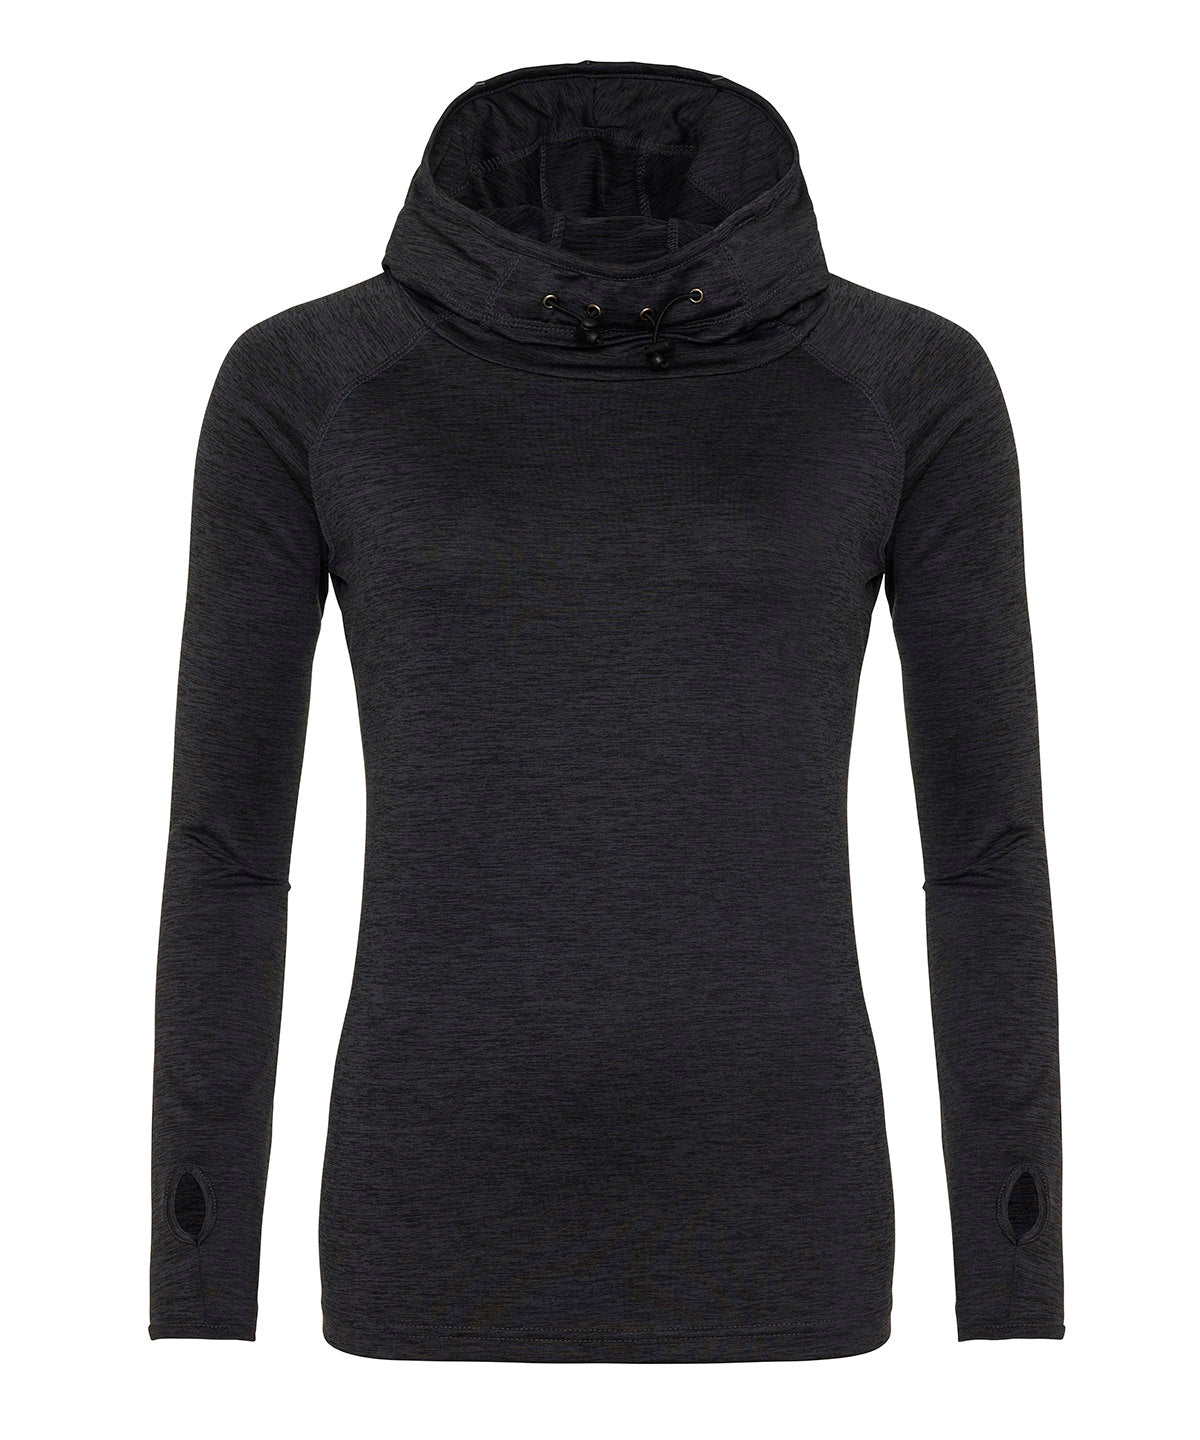 Personalised Sports Overtops - Black AWDis Just Cool Women's cool cowl neck top